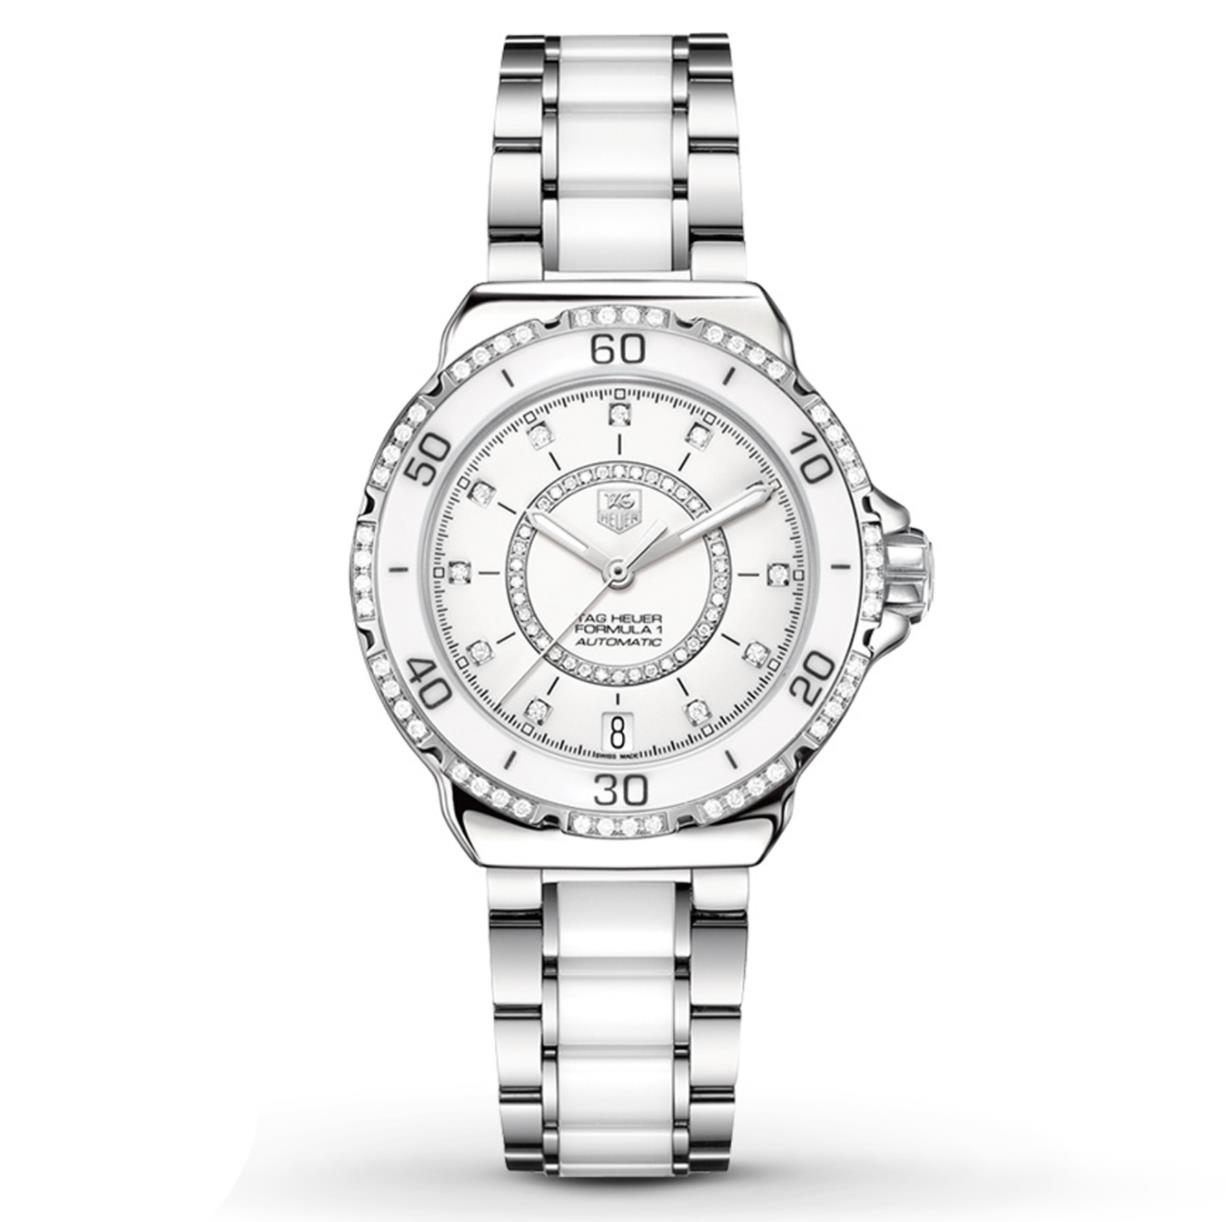 The 37mm fake watch is decorated with diamonds.